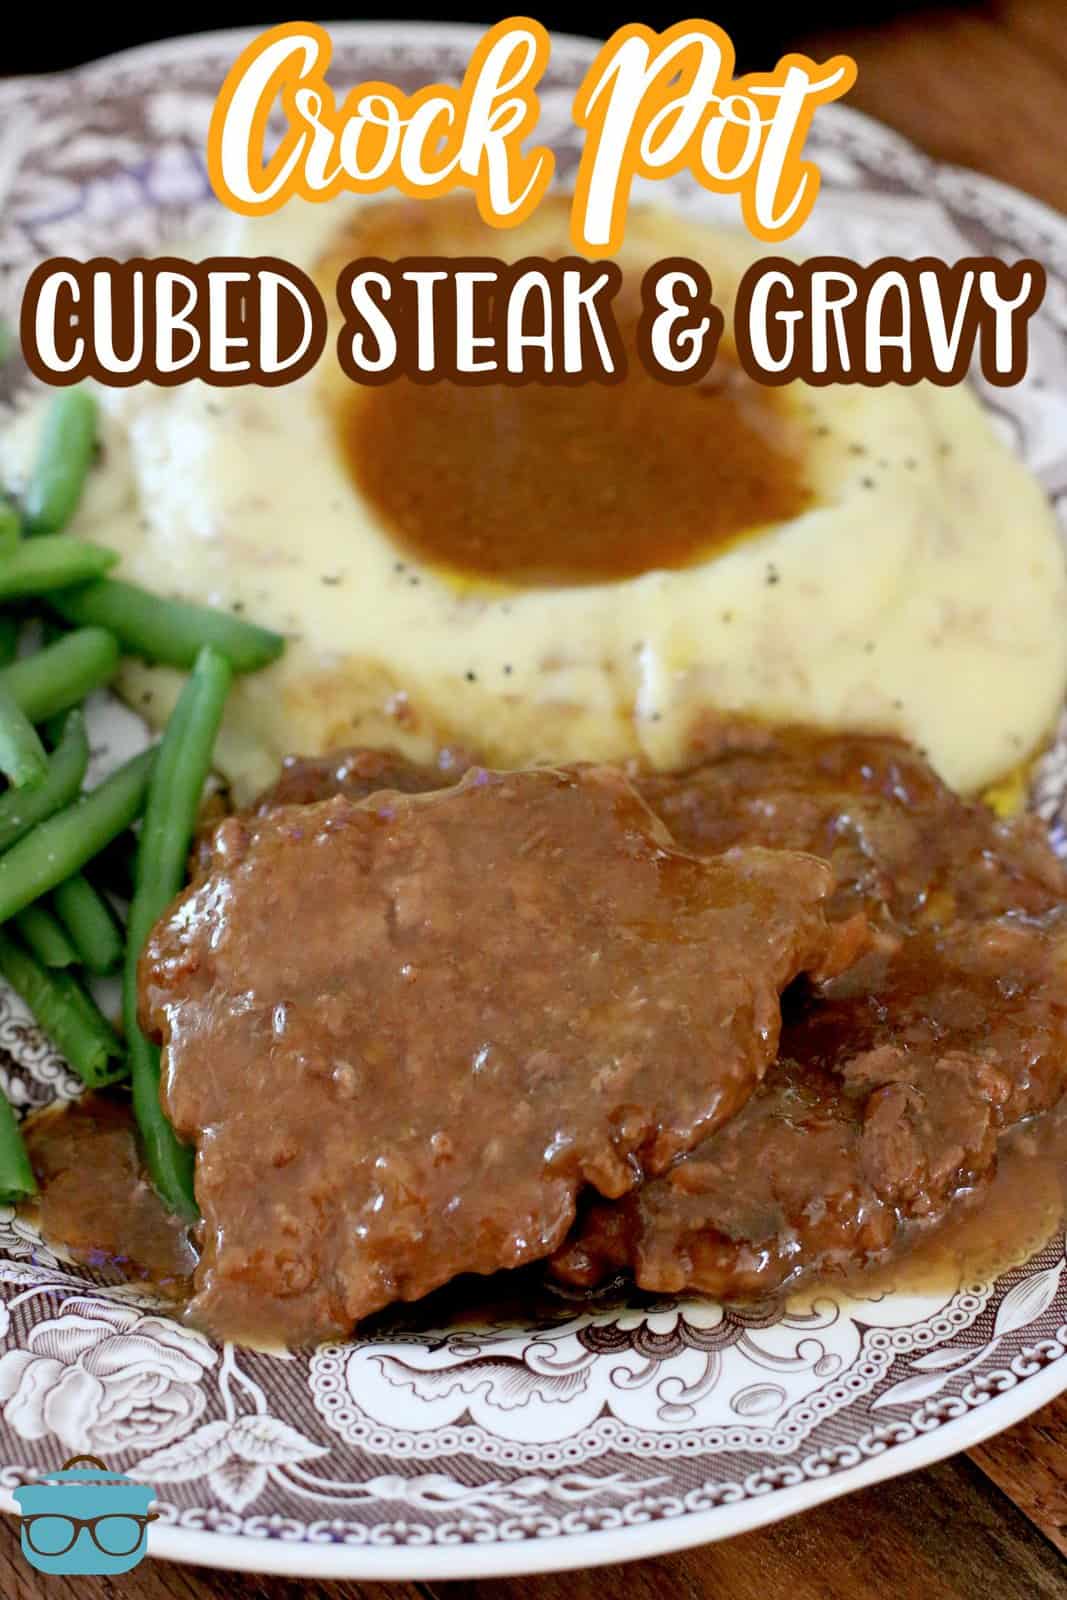 two cubed steaks on a plate with mashed potatoes and green beans.